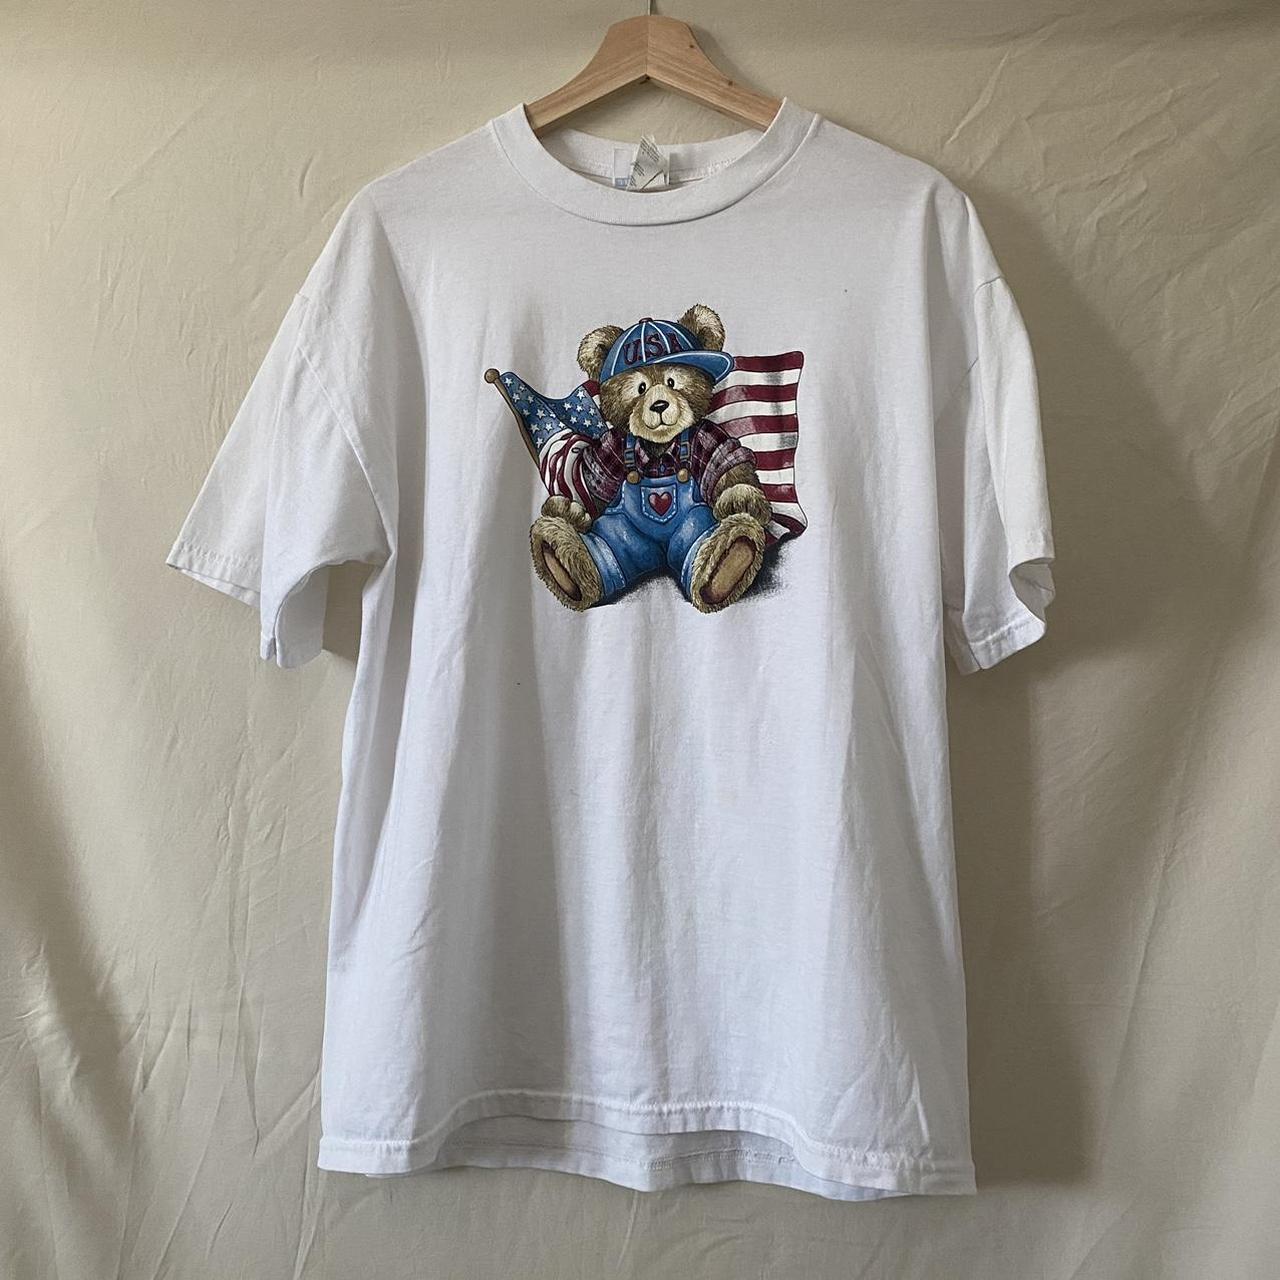 2000s USA BEAR BY JERZEES TSHIRT SIZE LARGE GREAT... - Depop